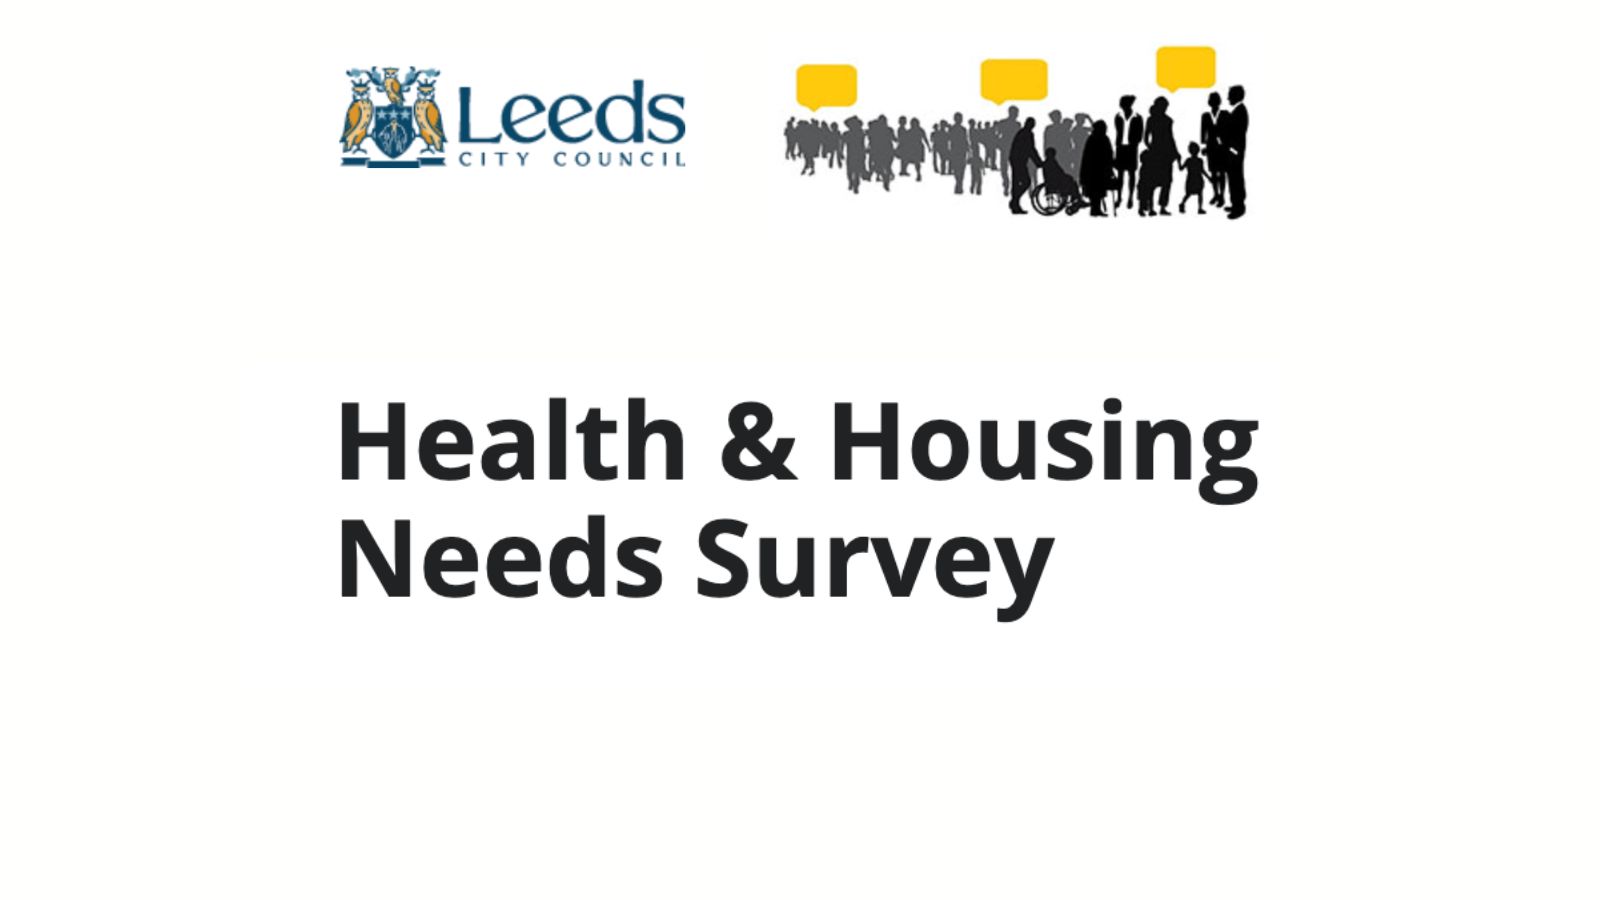 health and housing needs survey with Leeds city council logo